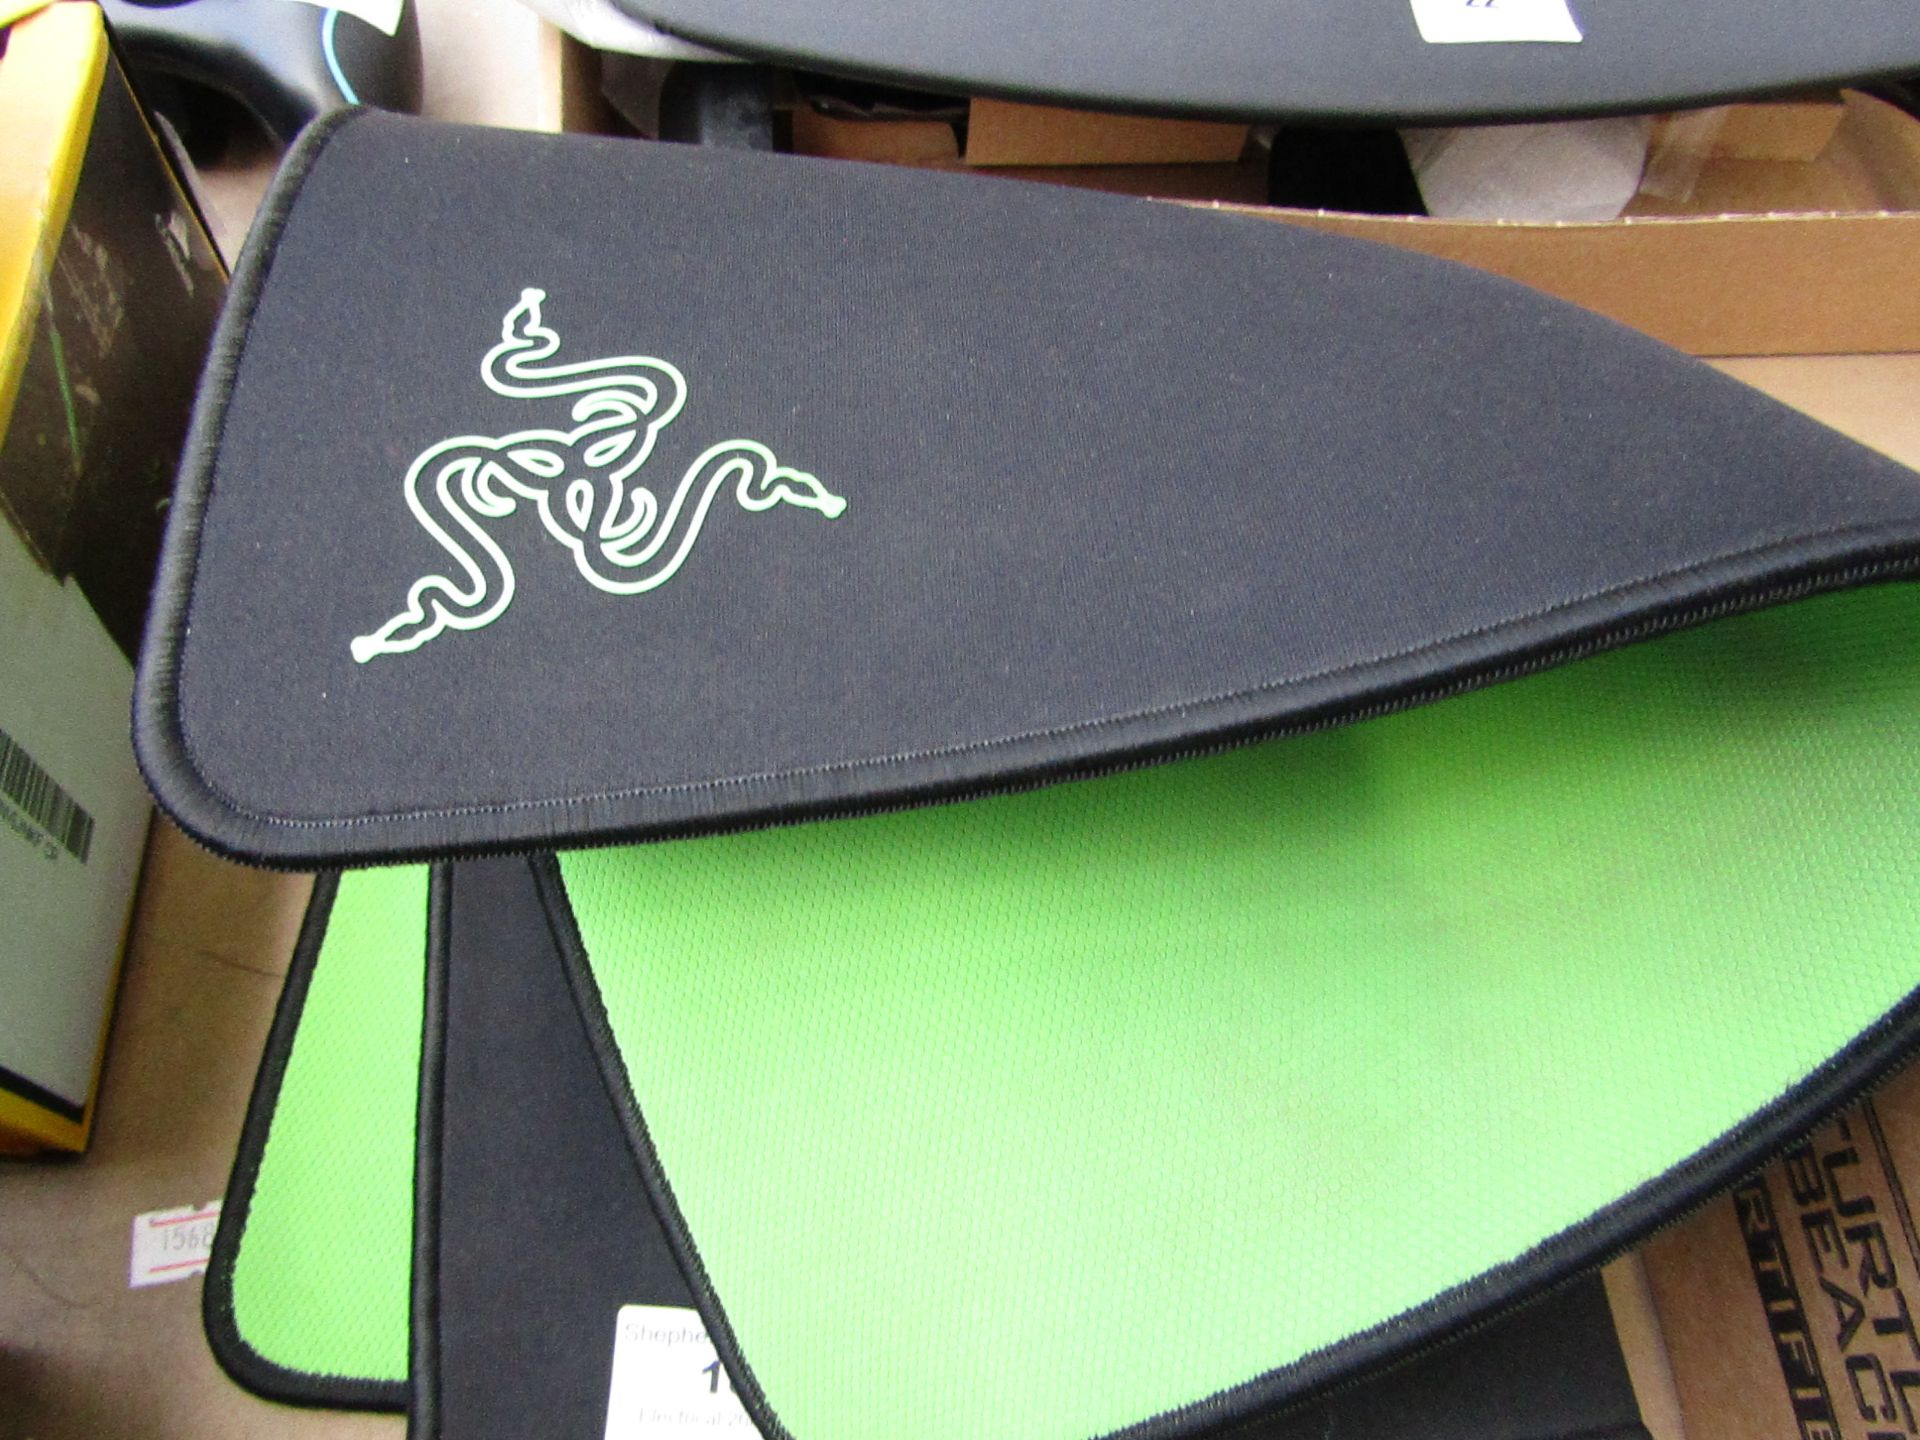 Razer gaming PC mouse mat, new.